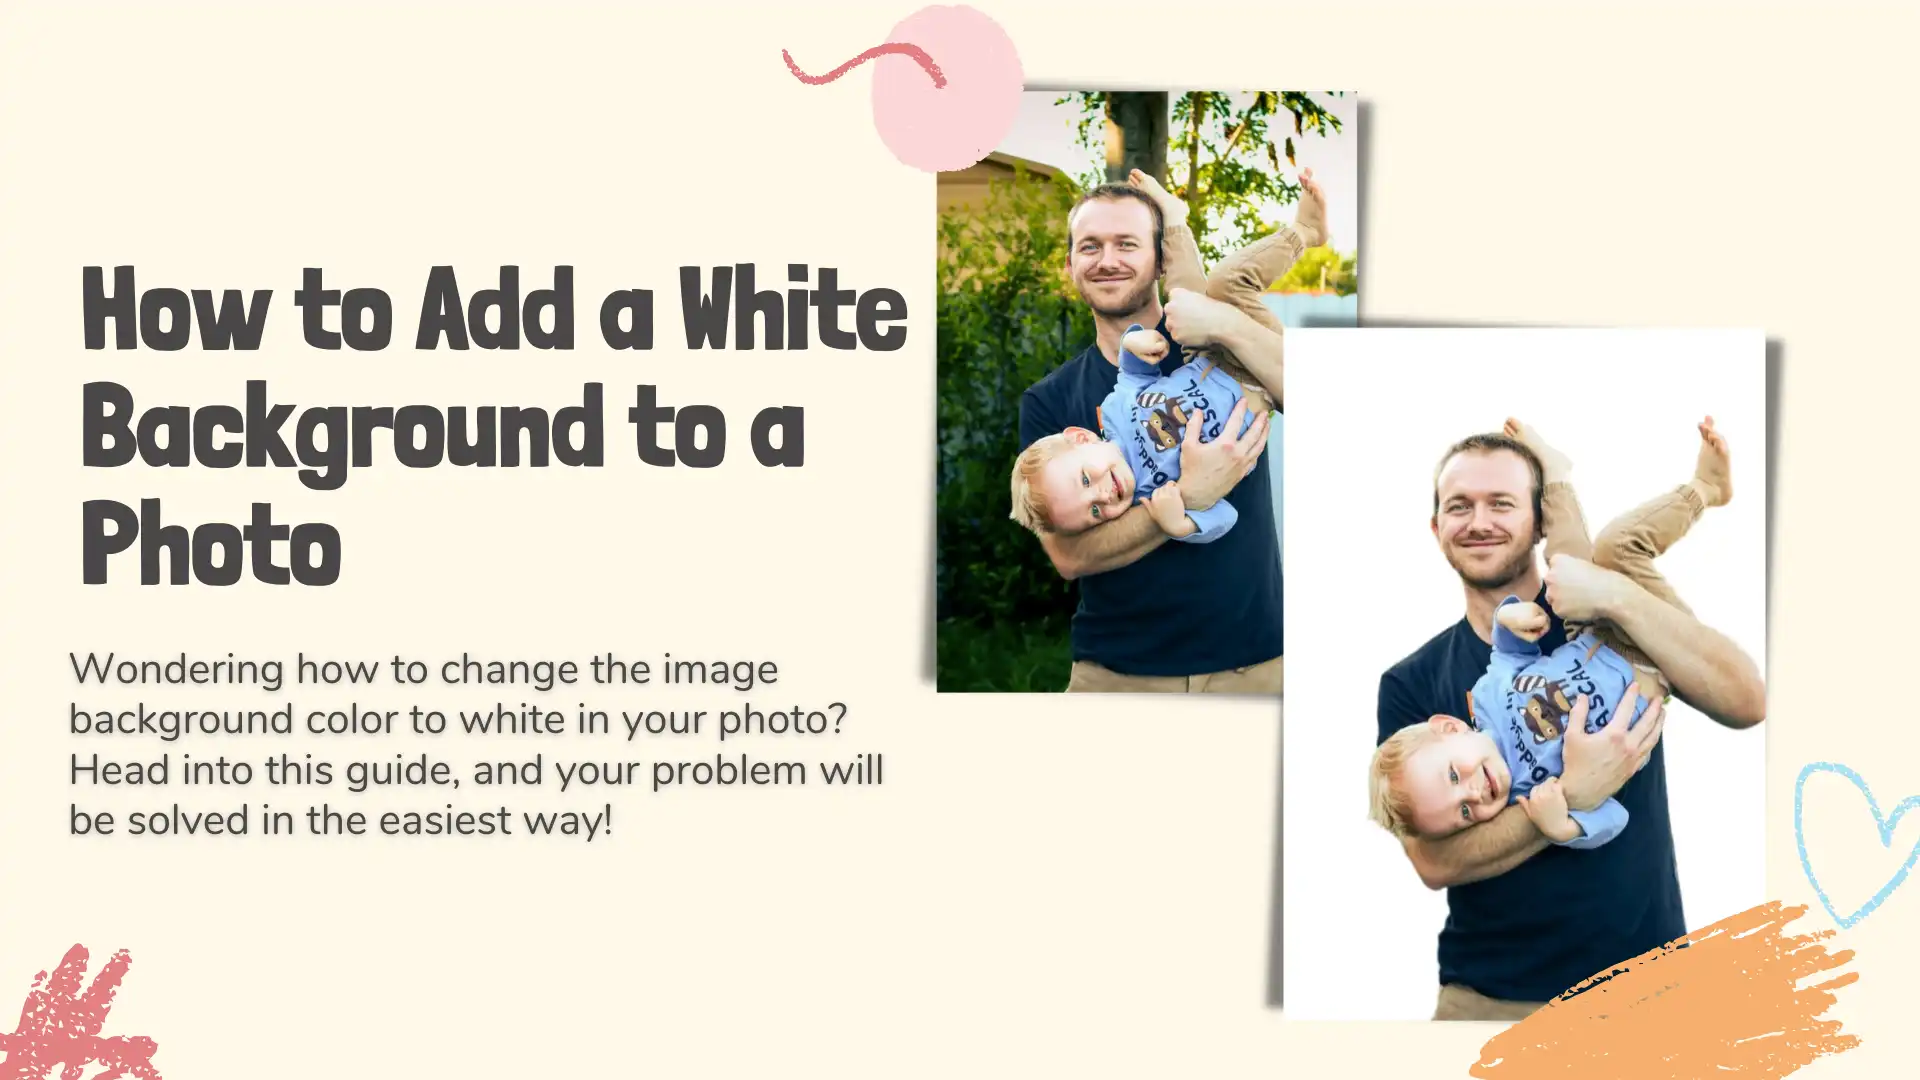 How to Add a White Background to a Photo: General Guide